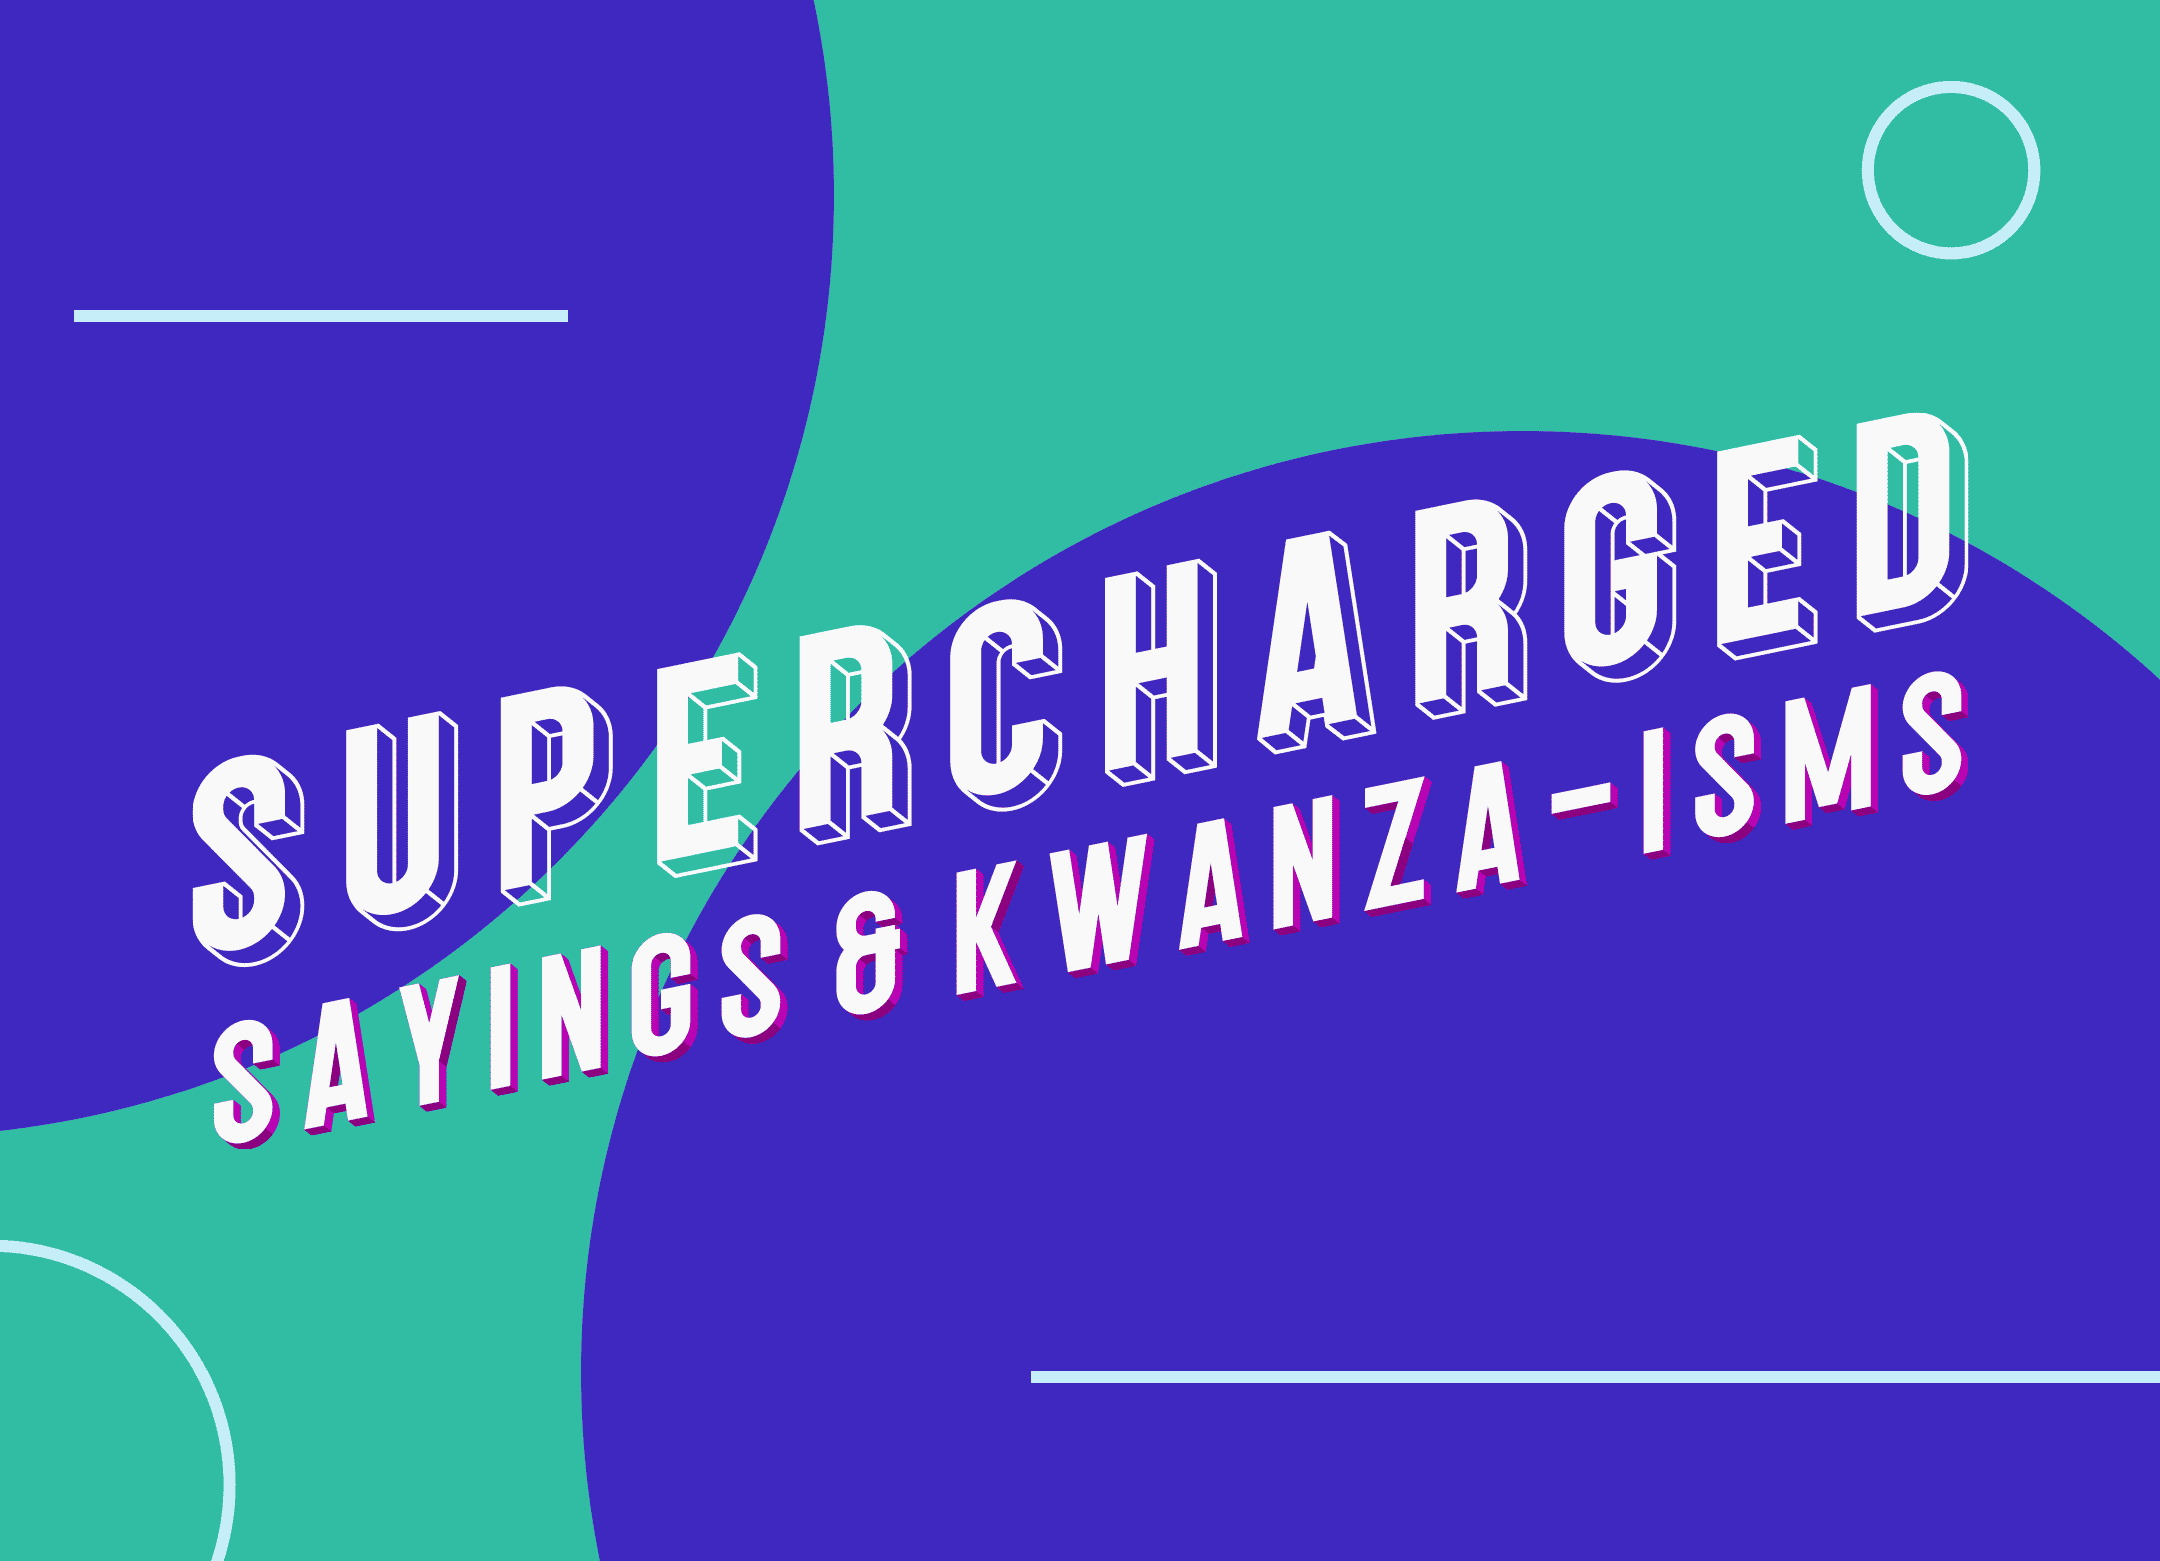 SUPERCHARGED Sayings and Kwanza-isms: A Dictionary of All Things SUPERCHARGED by Kwanza Jones